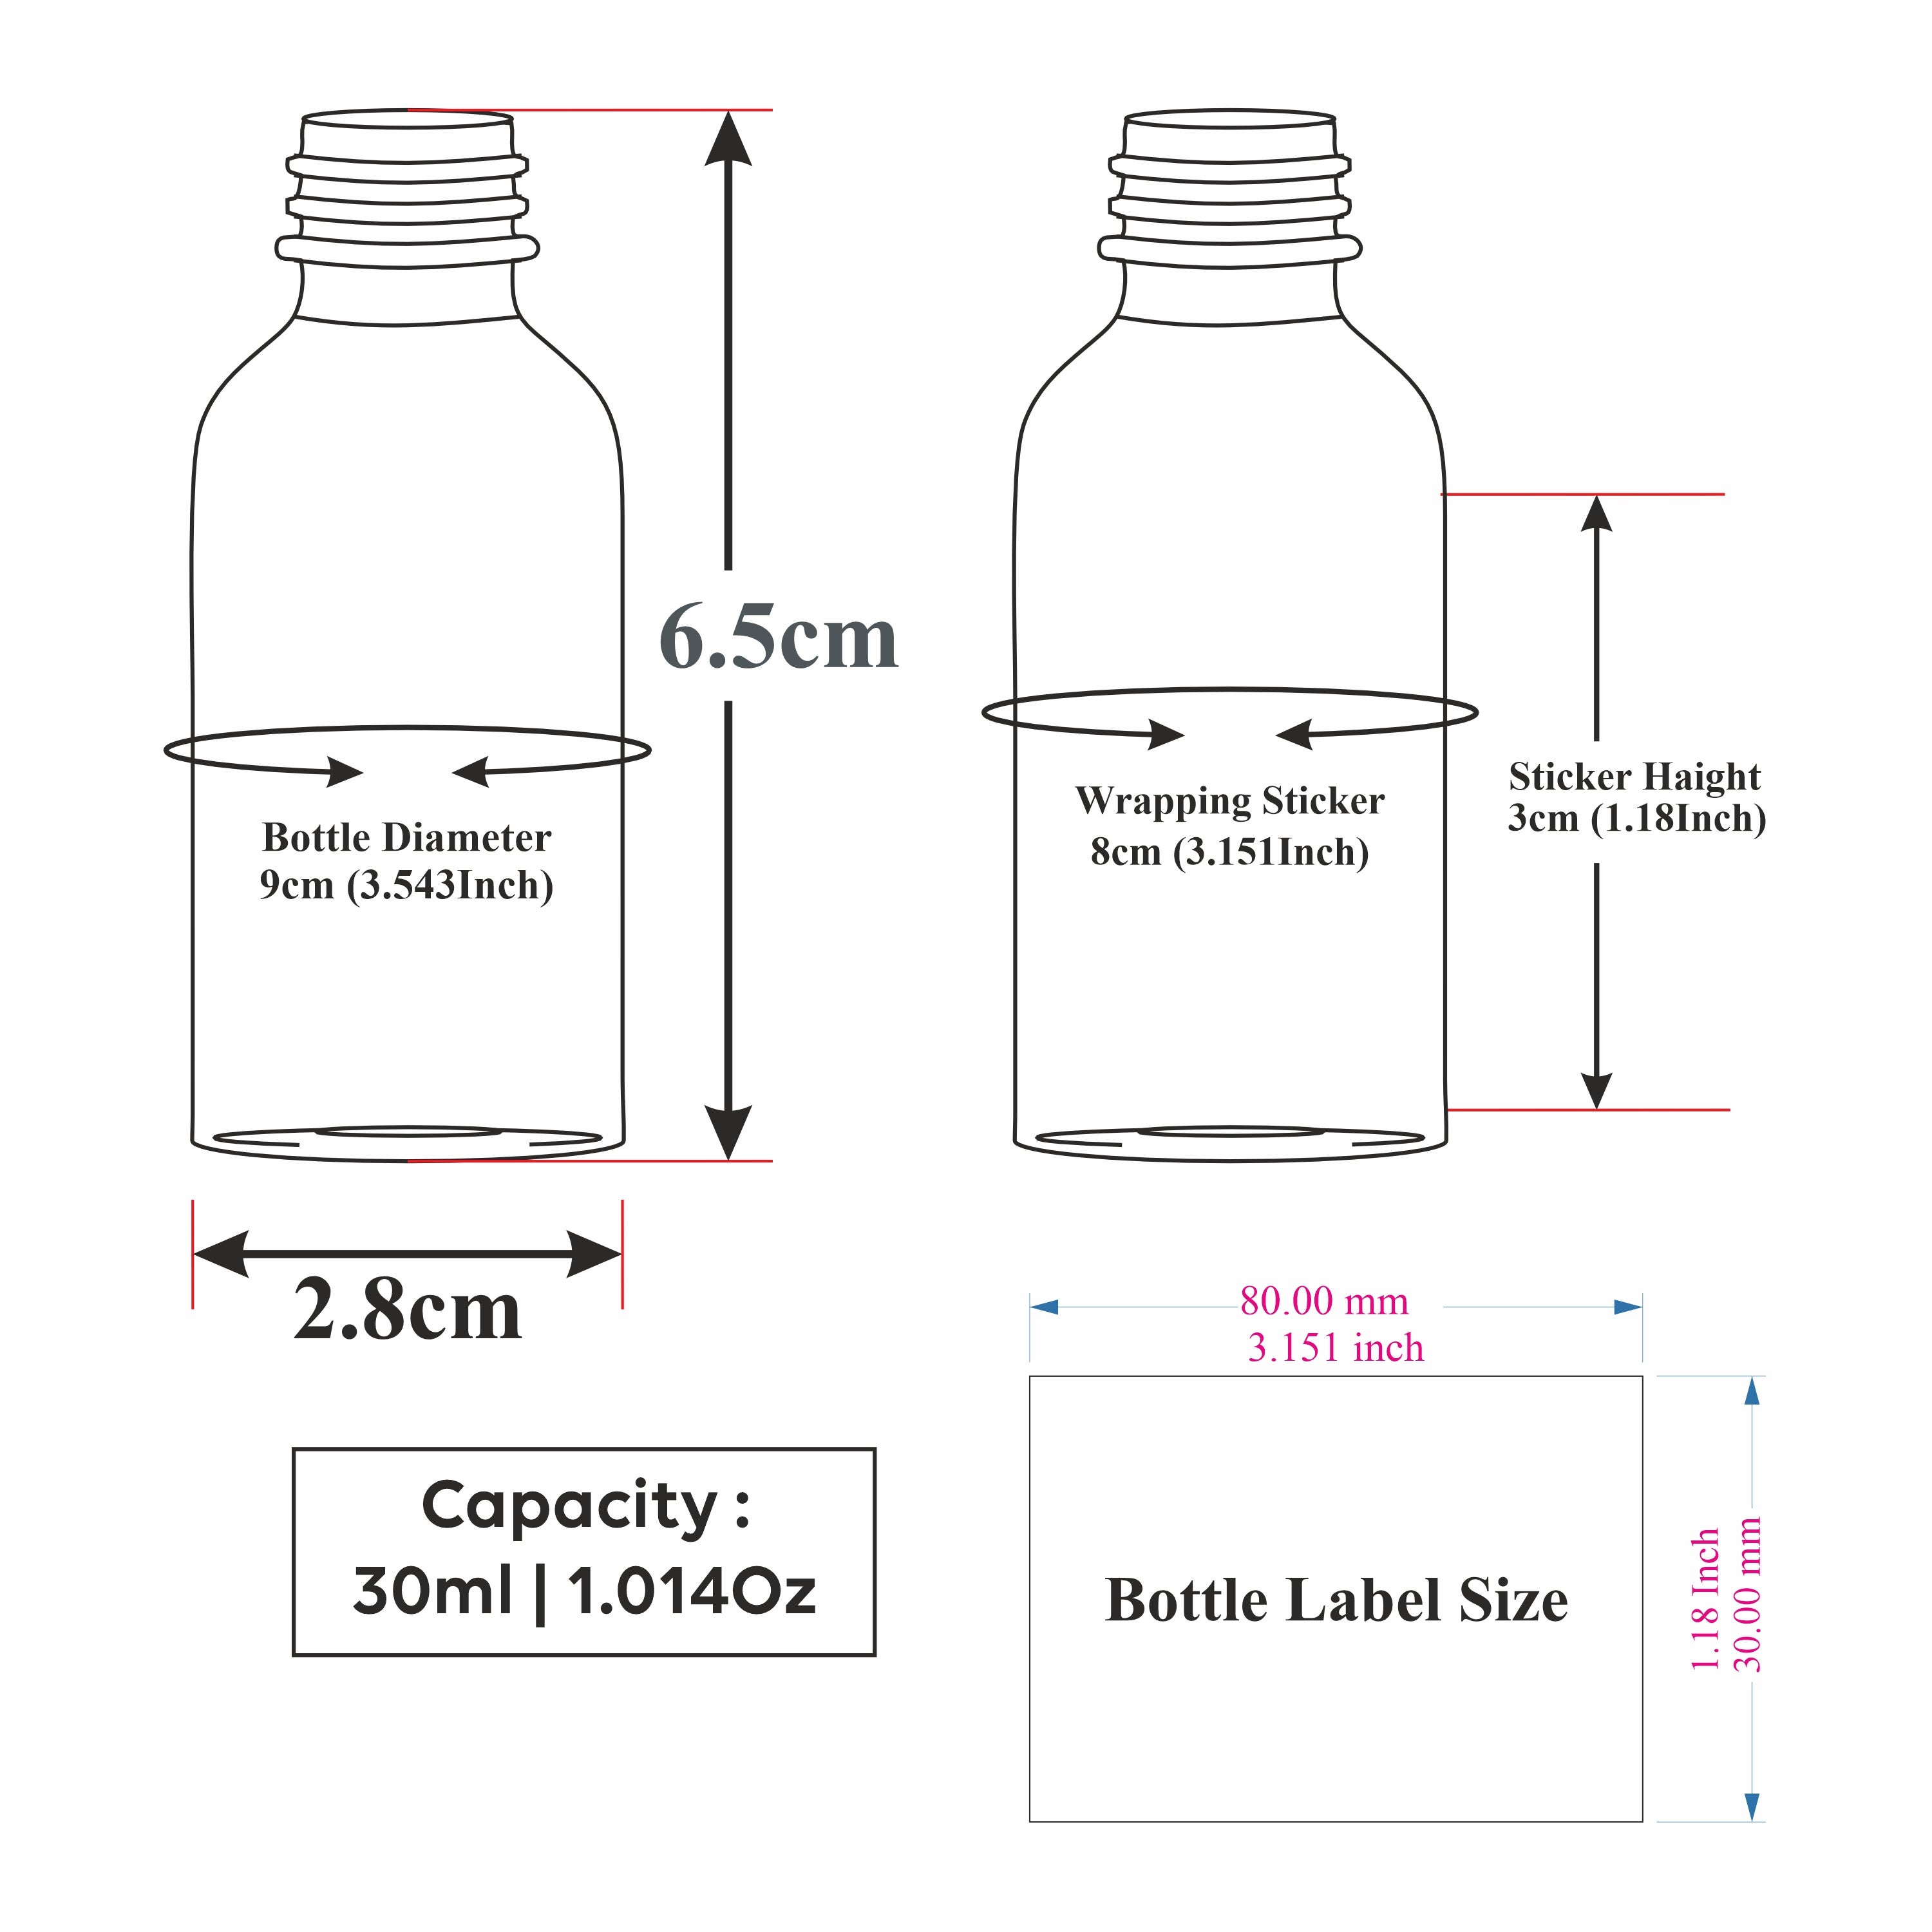 Transparent Frosted Glass Bottle with White Dropper| 15ml, 25ml & 30ml [ZMG57]